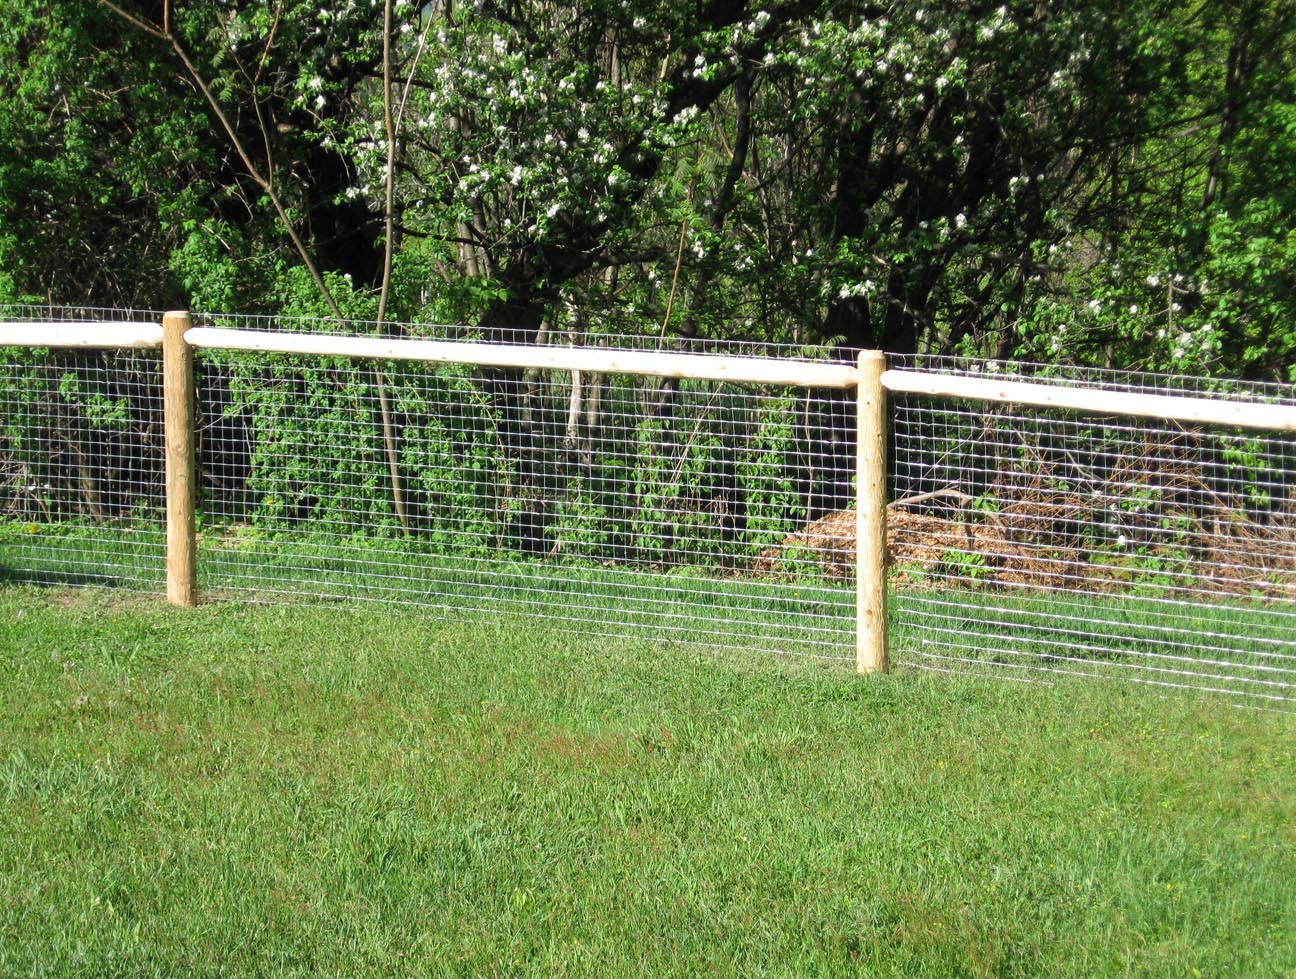 DIY Dog Fence
 Cheap Fence Ideas For Dogs In DIY Reusable And Portable